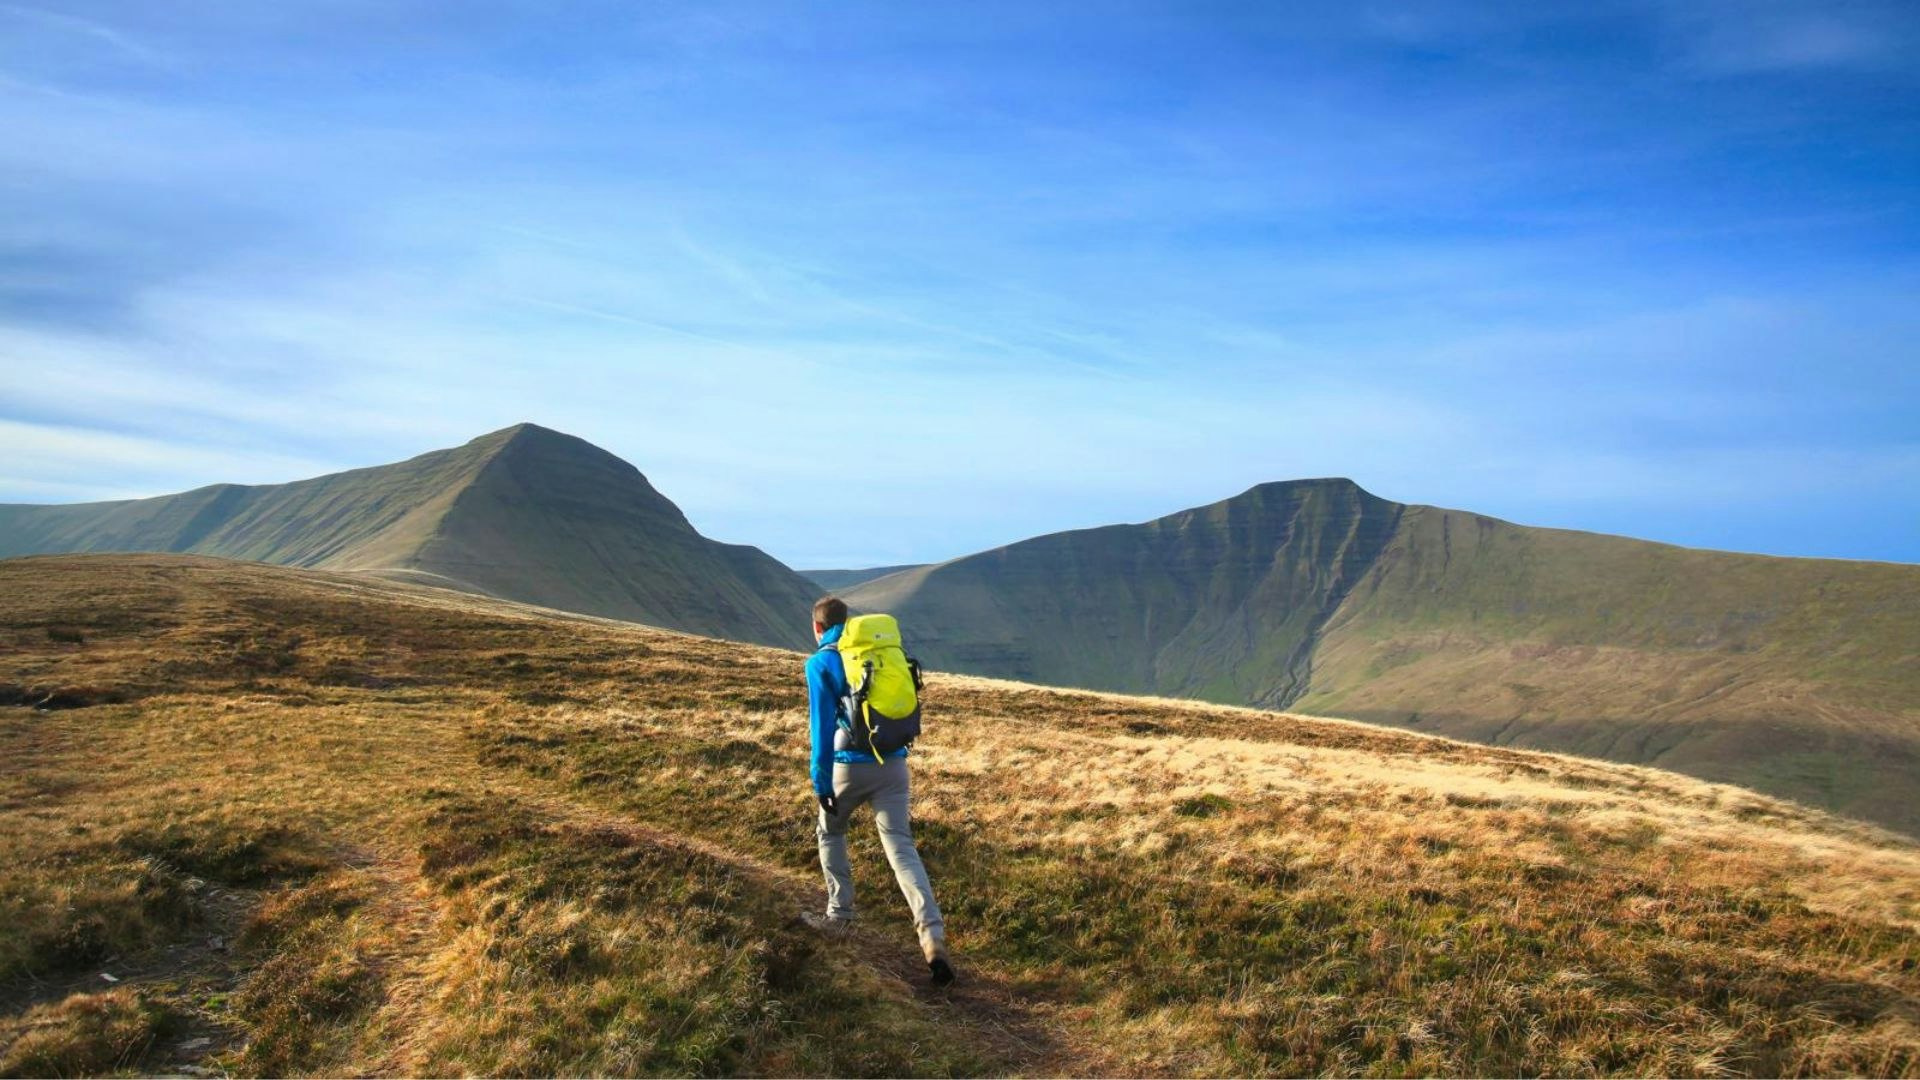 Heading up Cribyn looking over to Pen y Fan Brecon Beacons